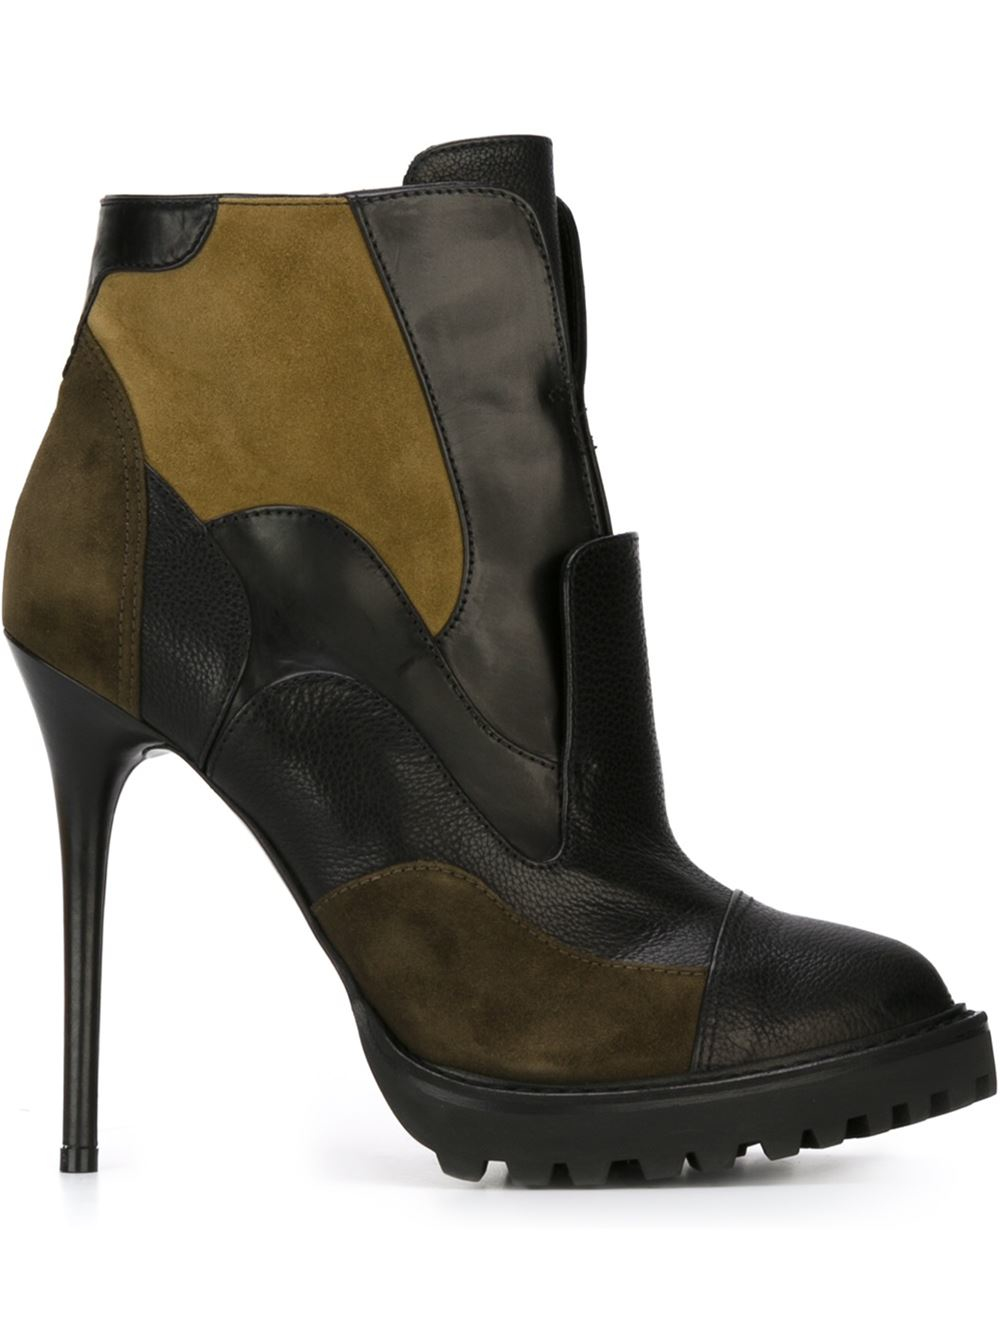 Alexander Mcqueen Patchwork Ankle Boots in Black | Lyst